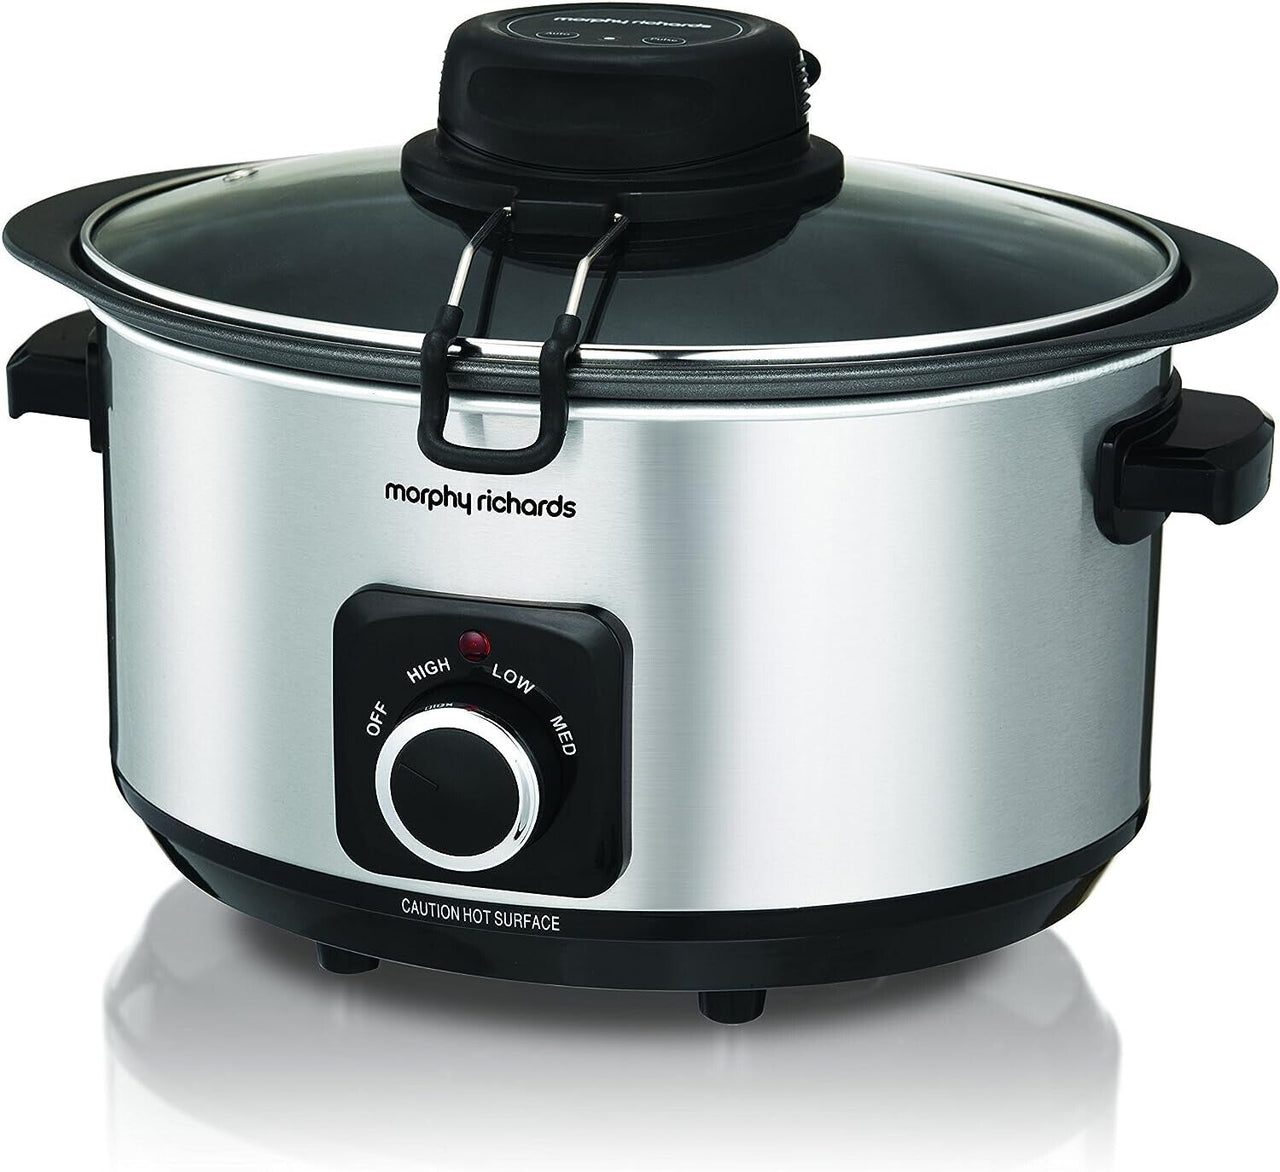 Morphy Richards 461010 Sear & Stew Slow Cooker 6.5 L Silver Auto Stirrer